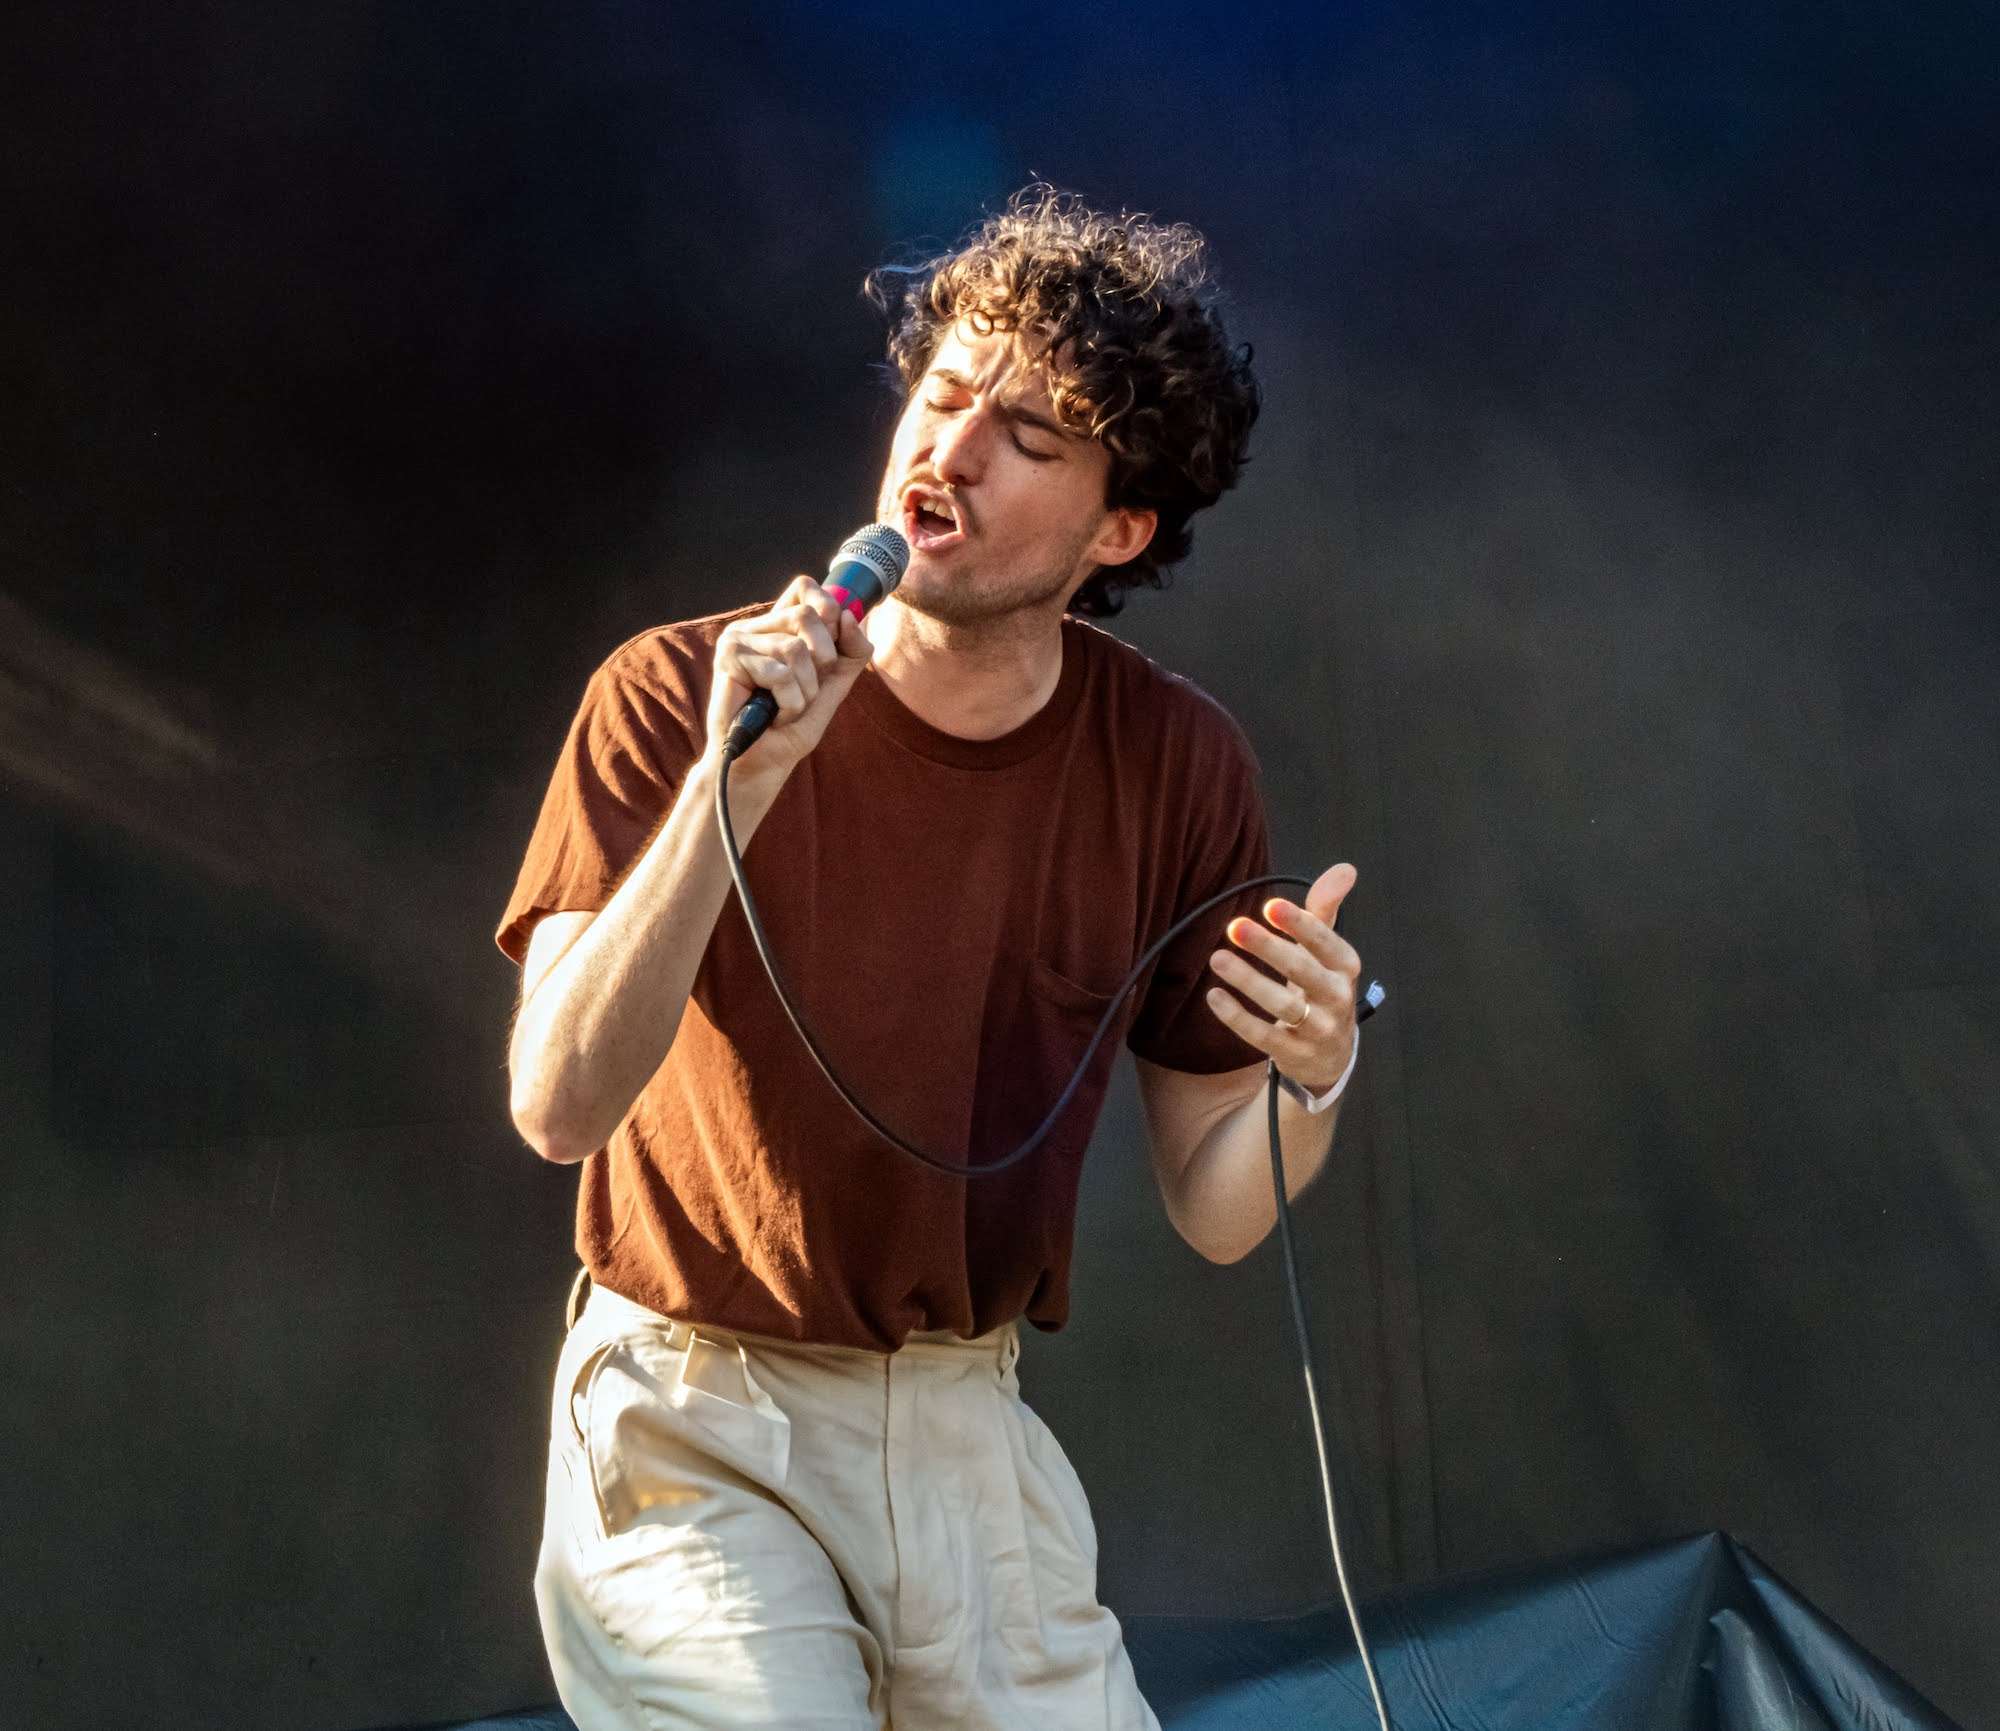 Nation Of Language Live At Pitchfork [GALLERY] 1